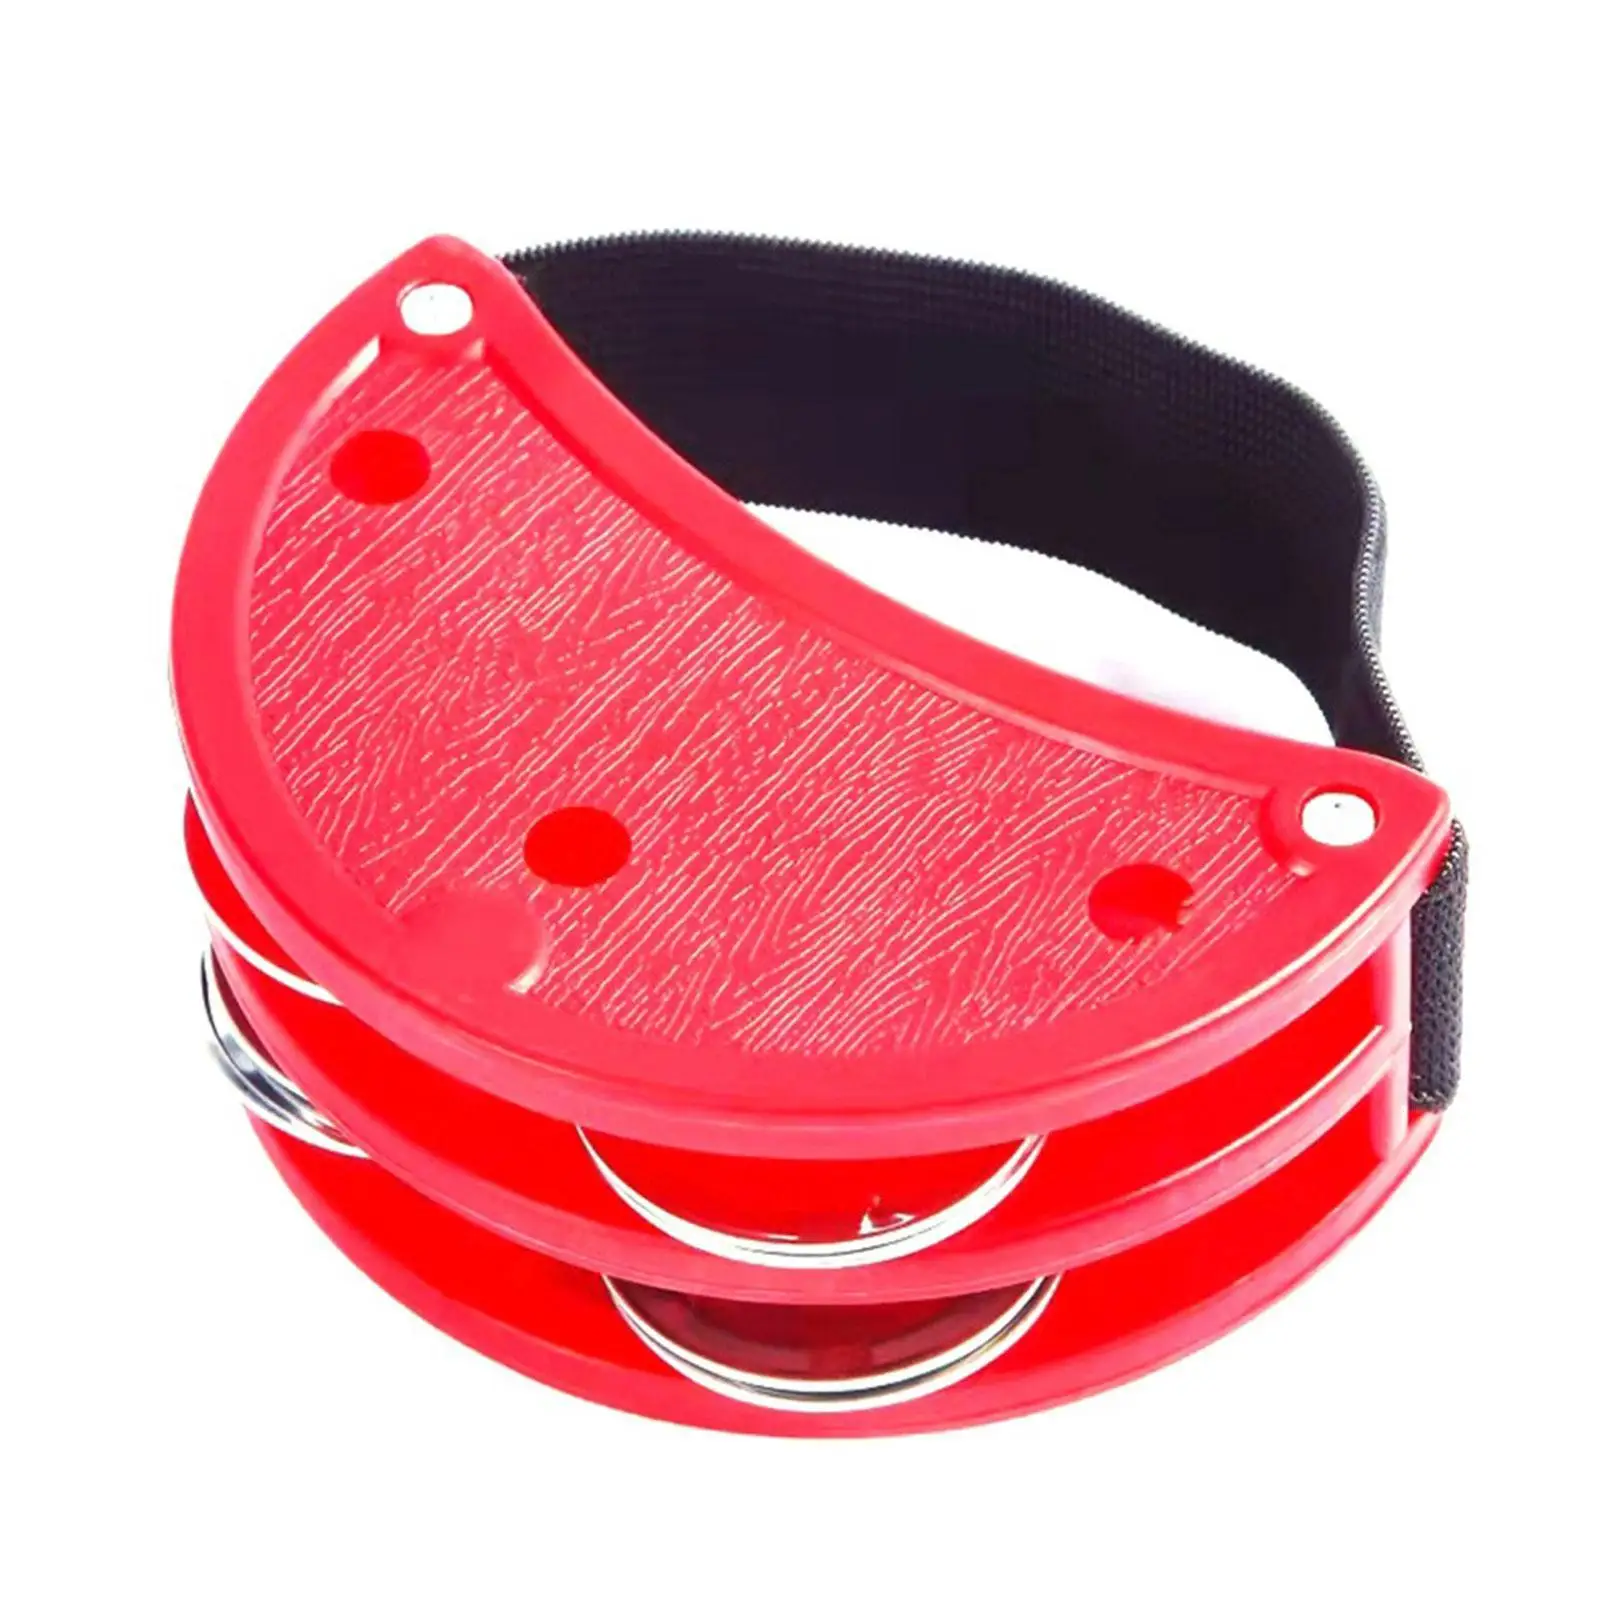 

Foot Tambourine Steel Percussion Jingle Shaker Musical Instrument Bells Rattle Accompaniment Red Black Color